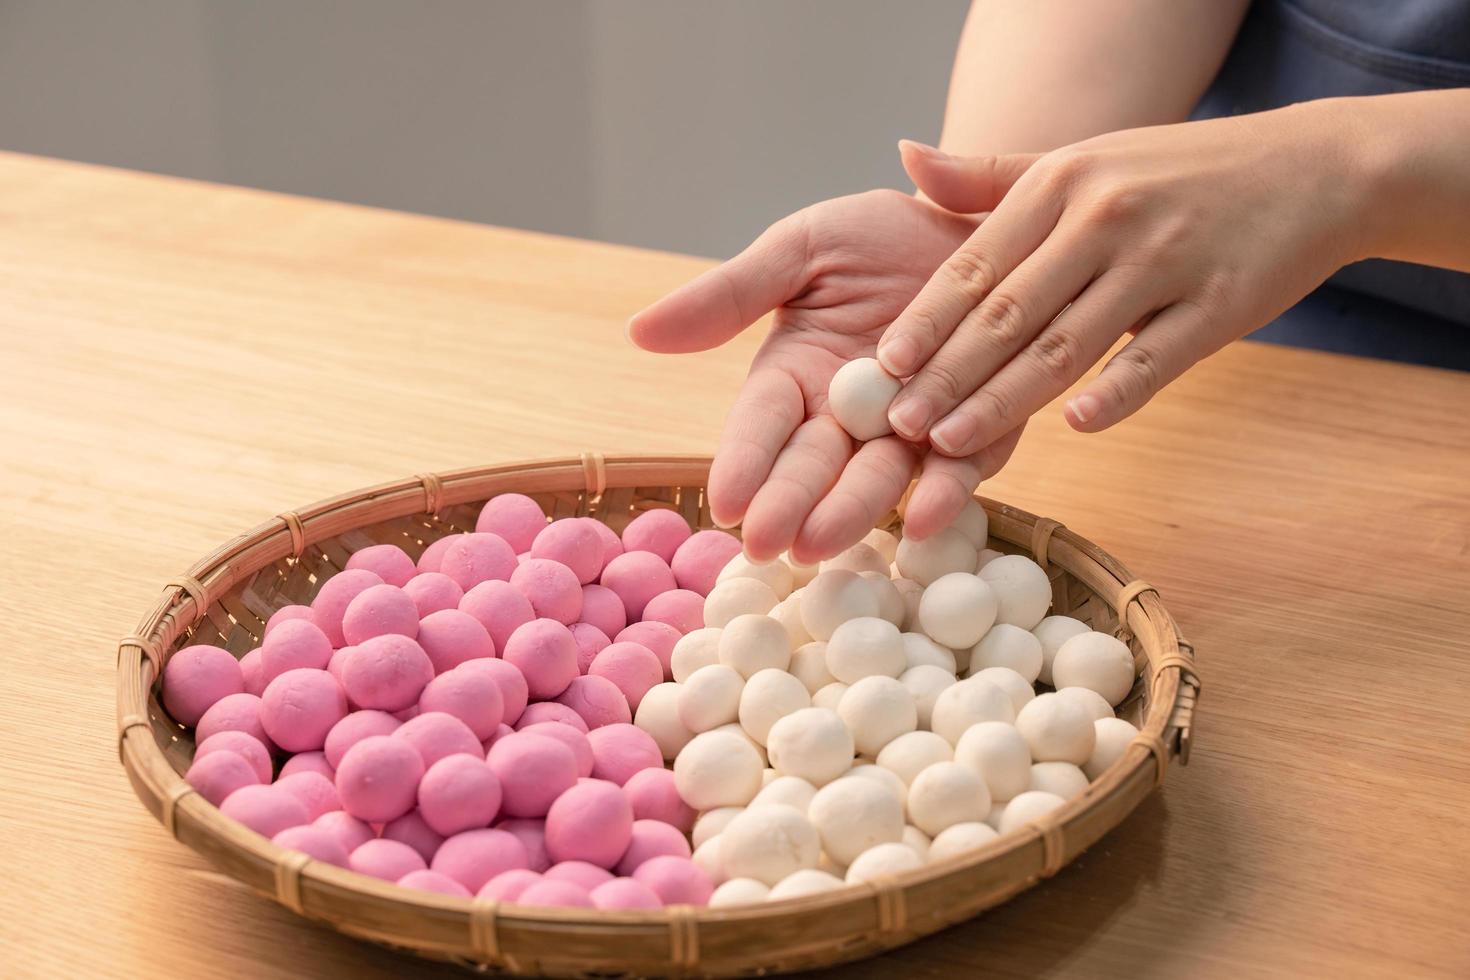 An Asia woman is making Tang yuan, yuan xiao, Chinese traditional food rice dumplings in red and white for lunar new year, winter festival, close up. photo